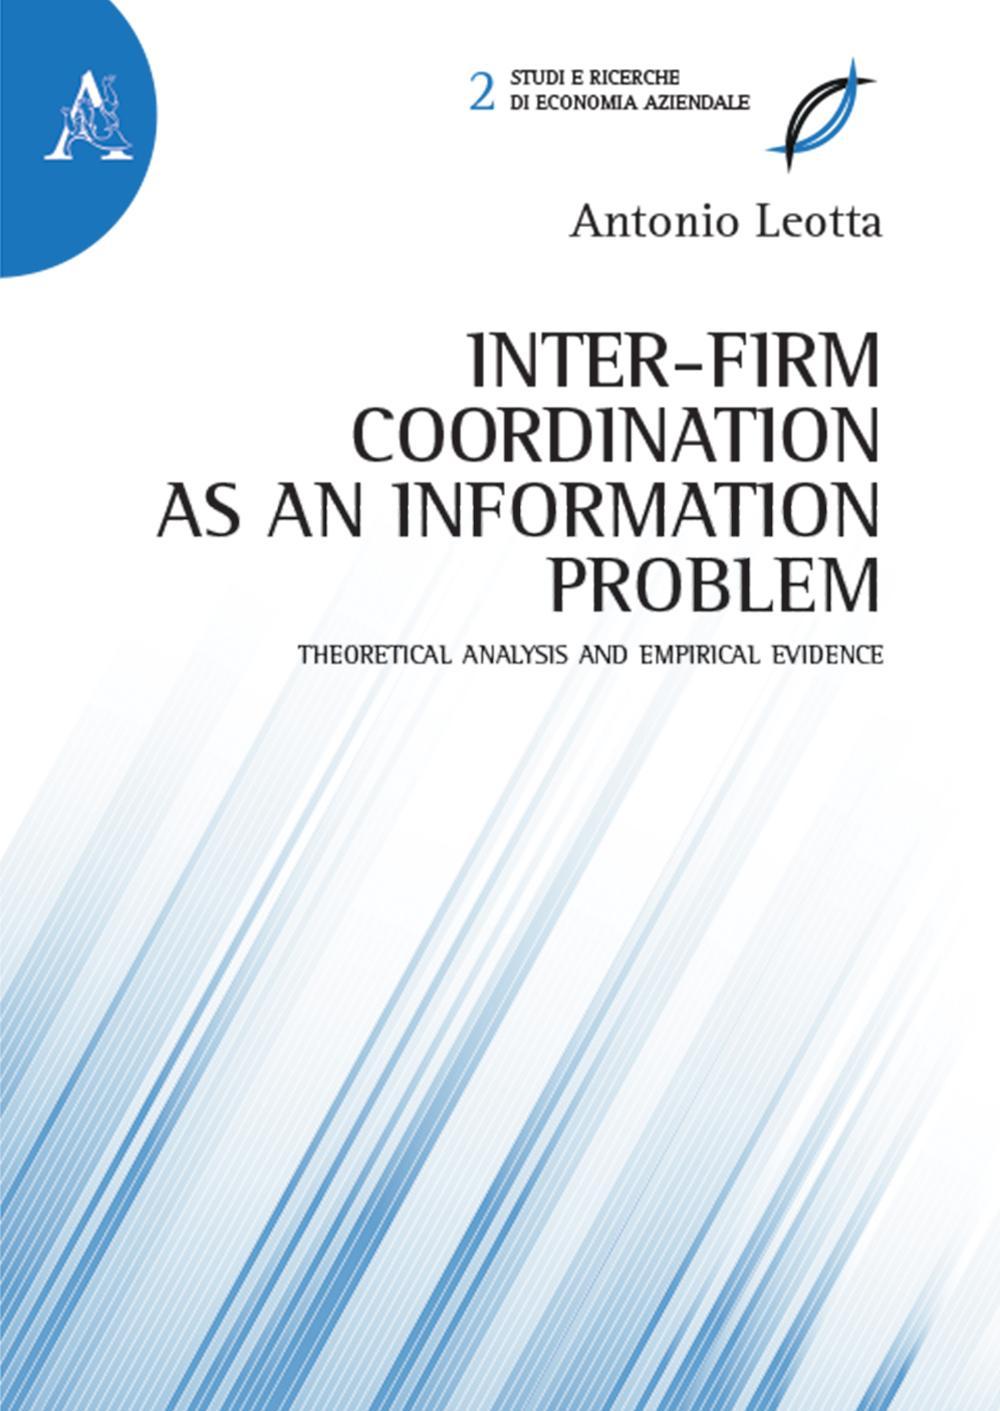 Inter-firm coordination as an information problem. Theoretical analysis and empirical evidence 